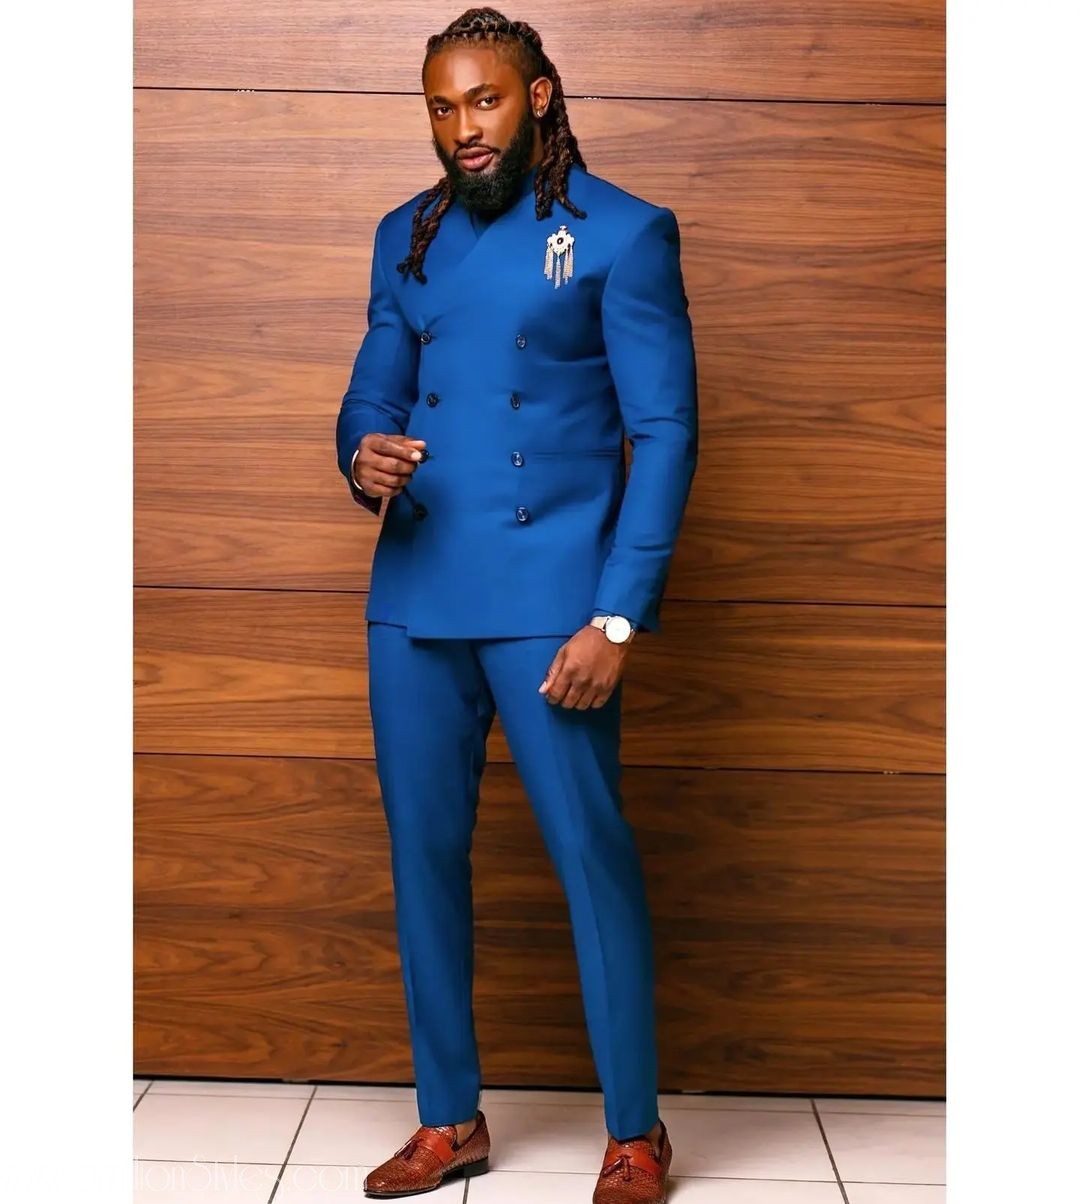 Check Out the Men Styles At The 2022 AMVCA8 Edition